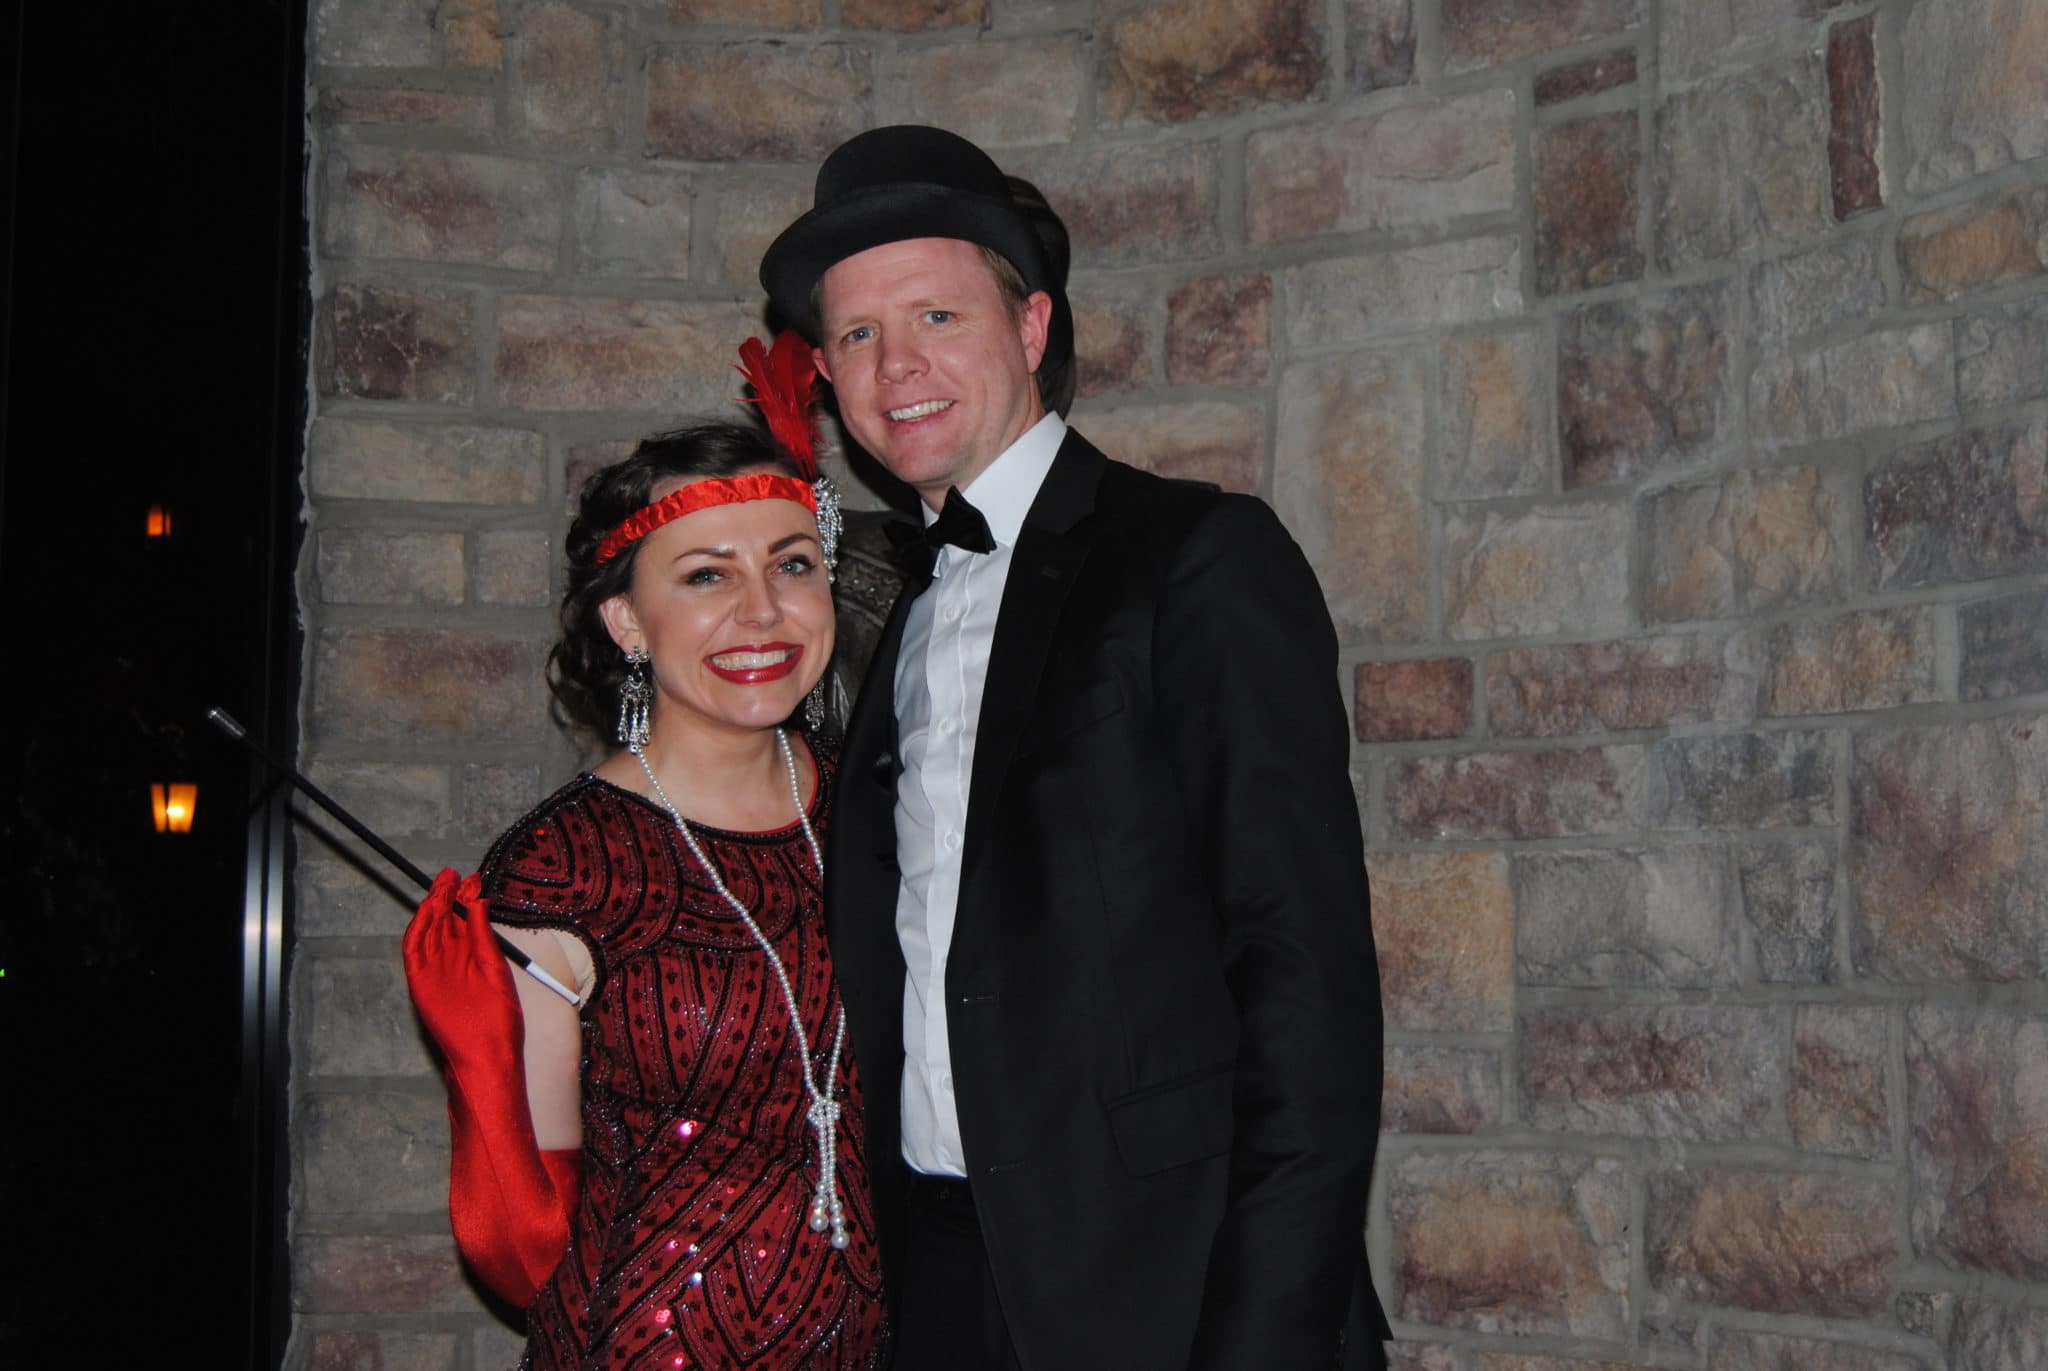 Couple out on roaring 20's date night. 